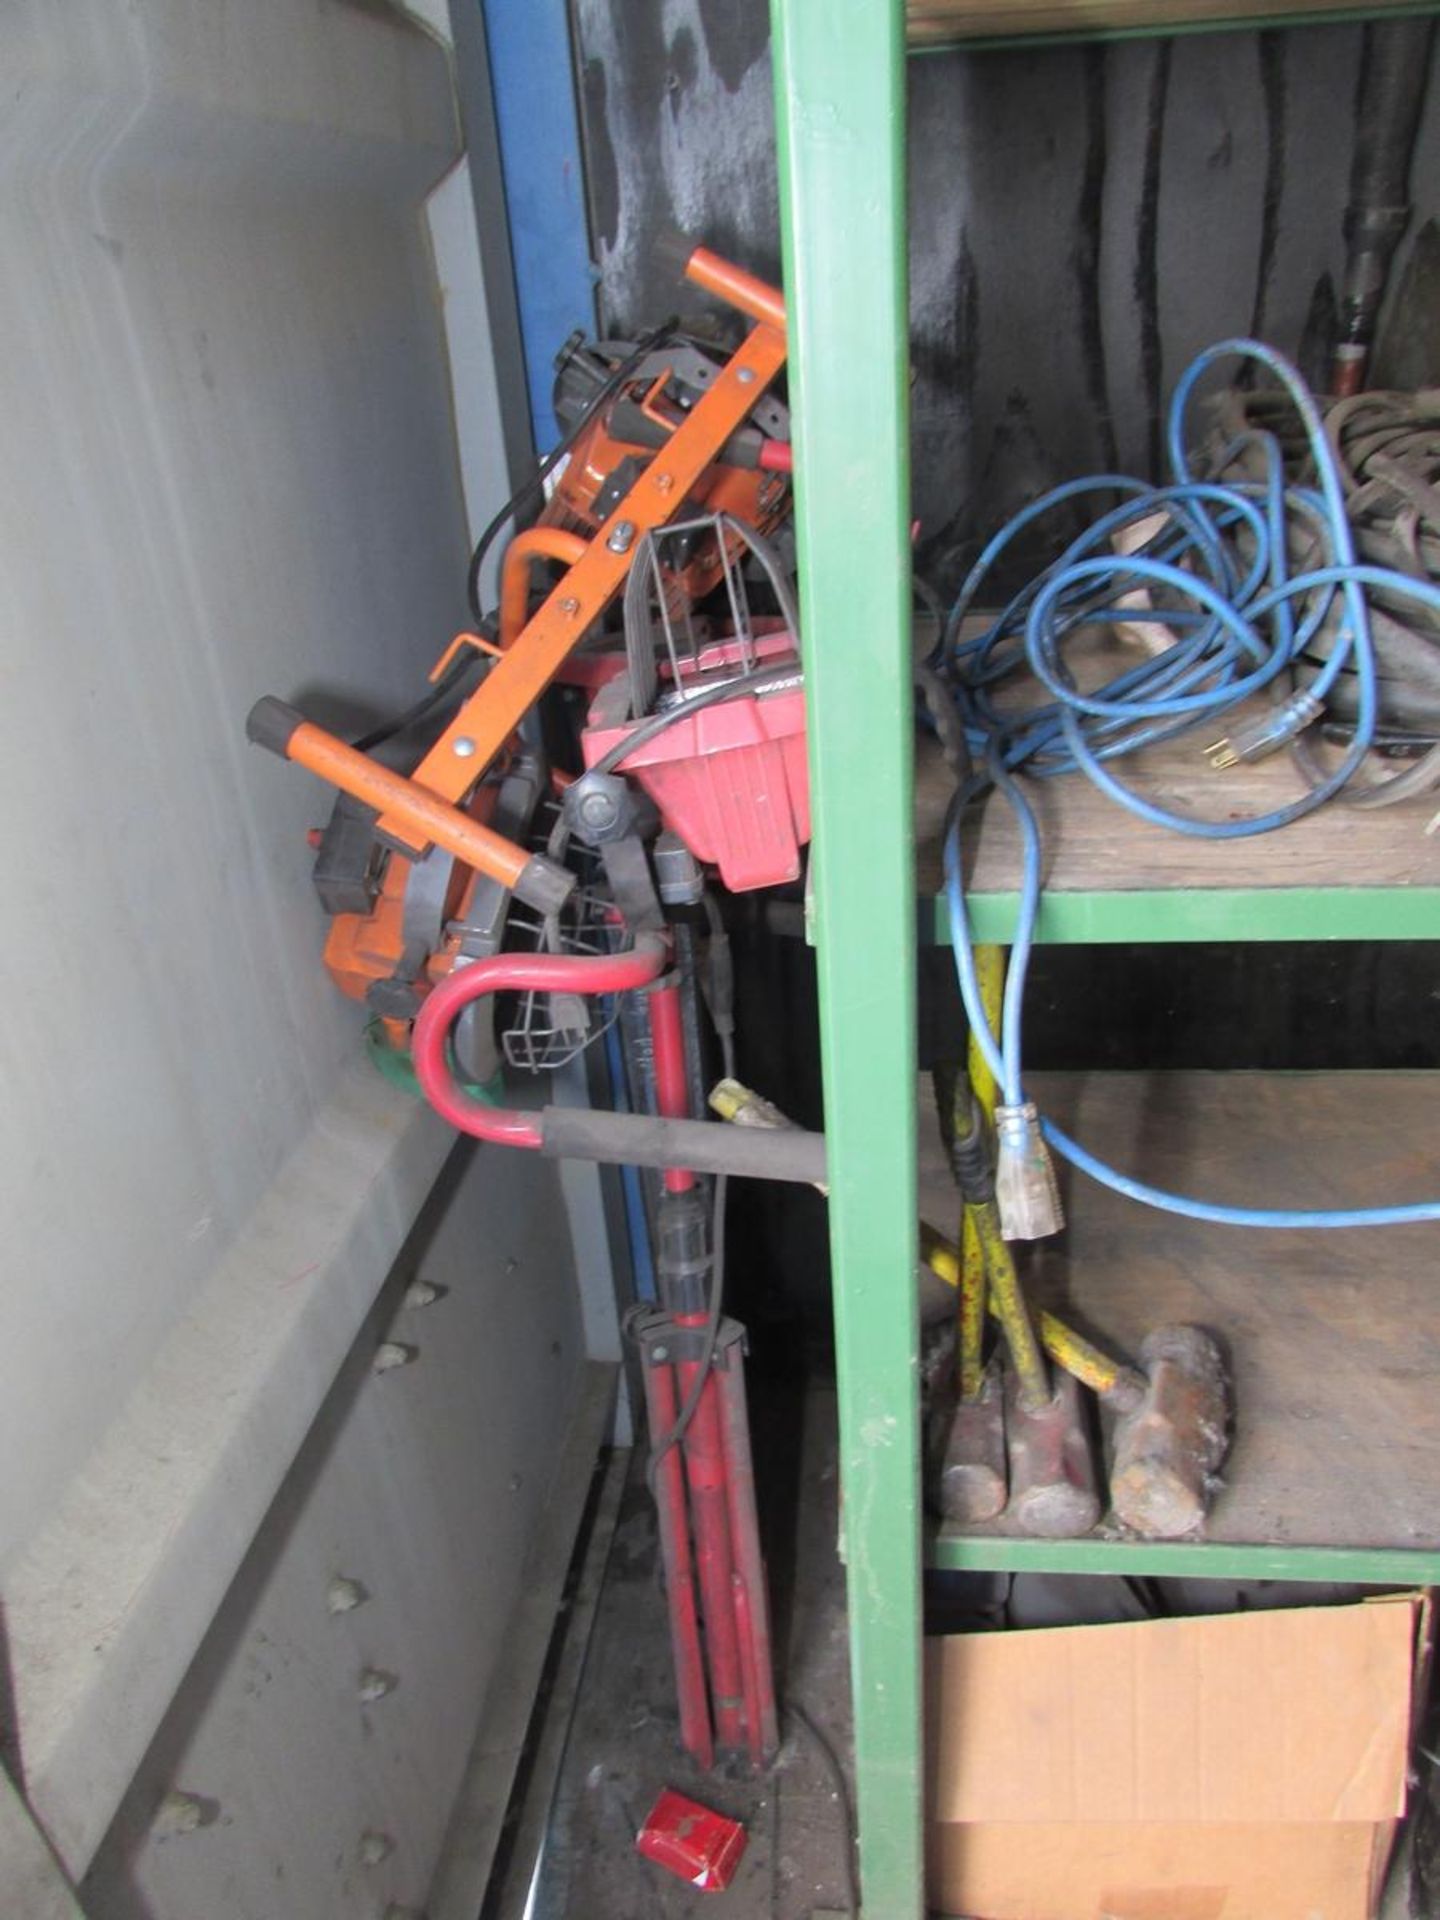 Contents of Shipping Container - Image 18 of 18